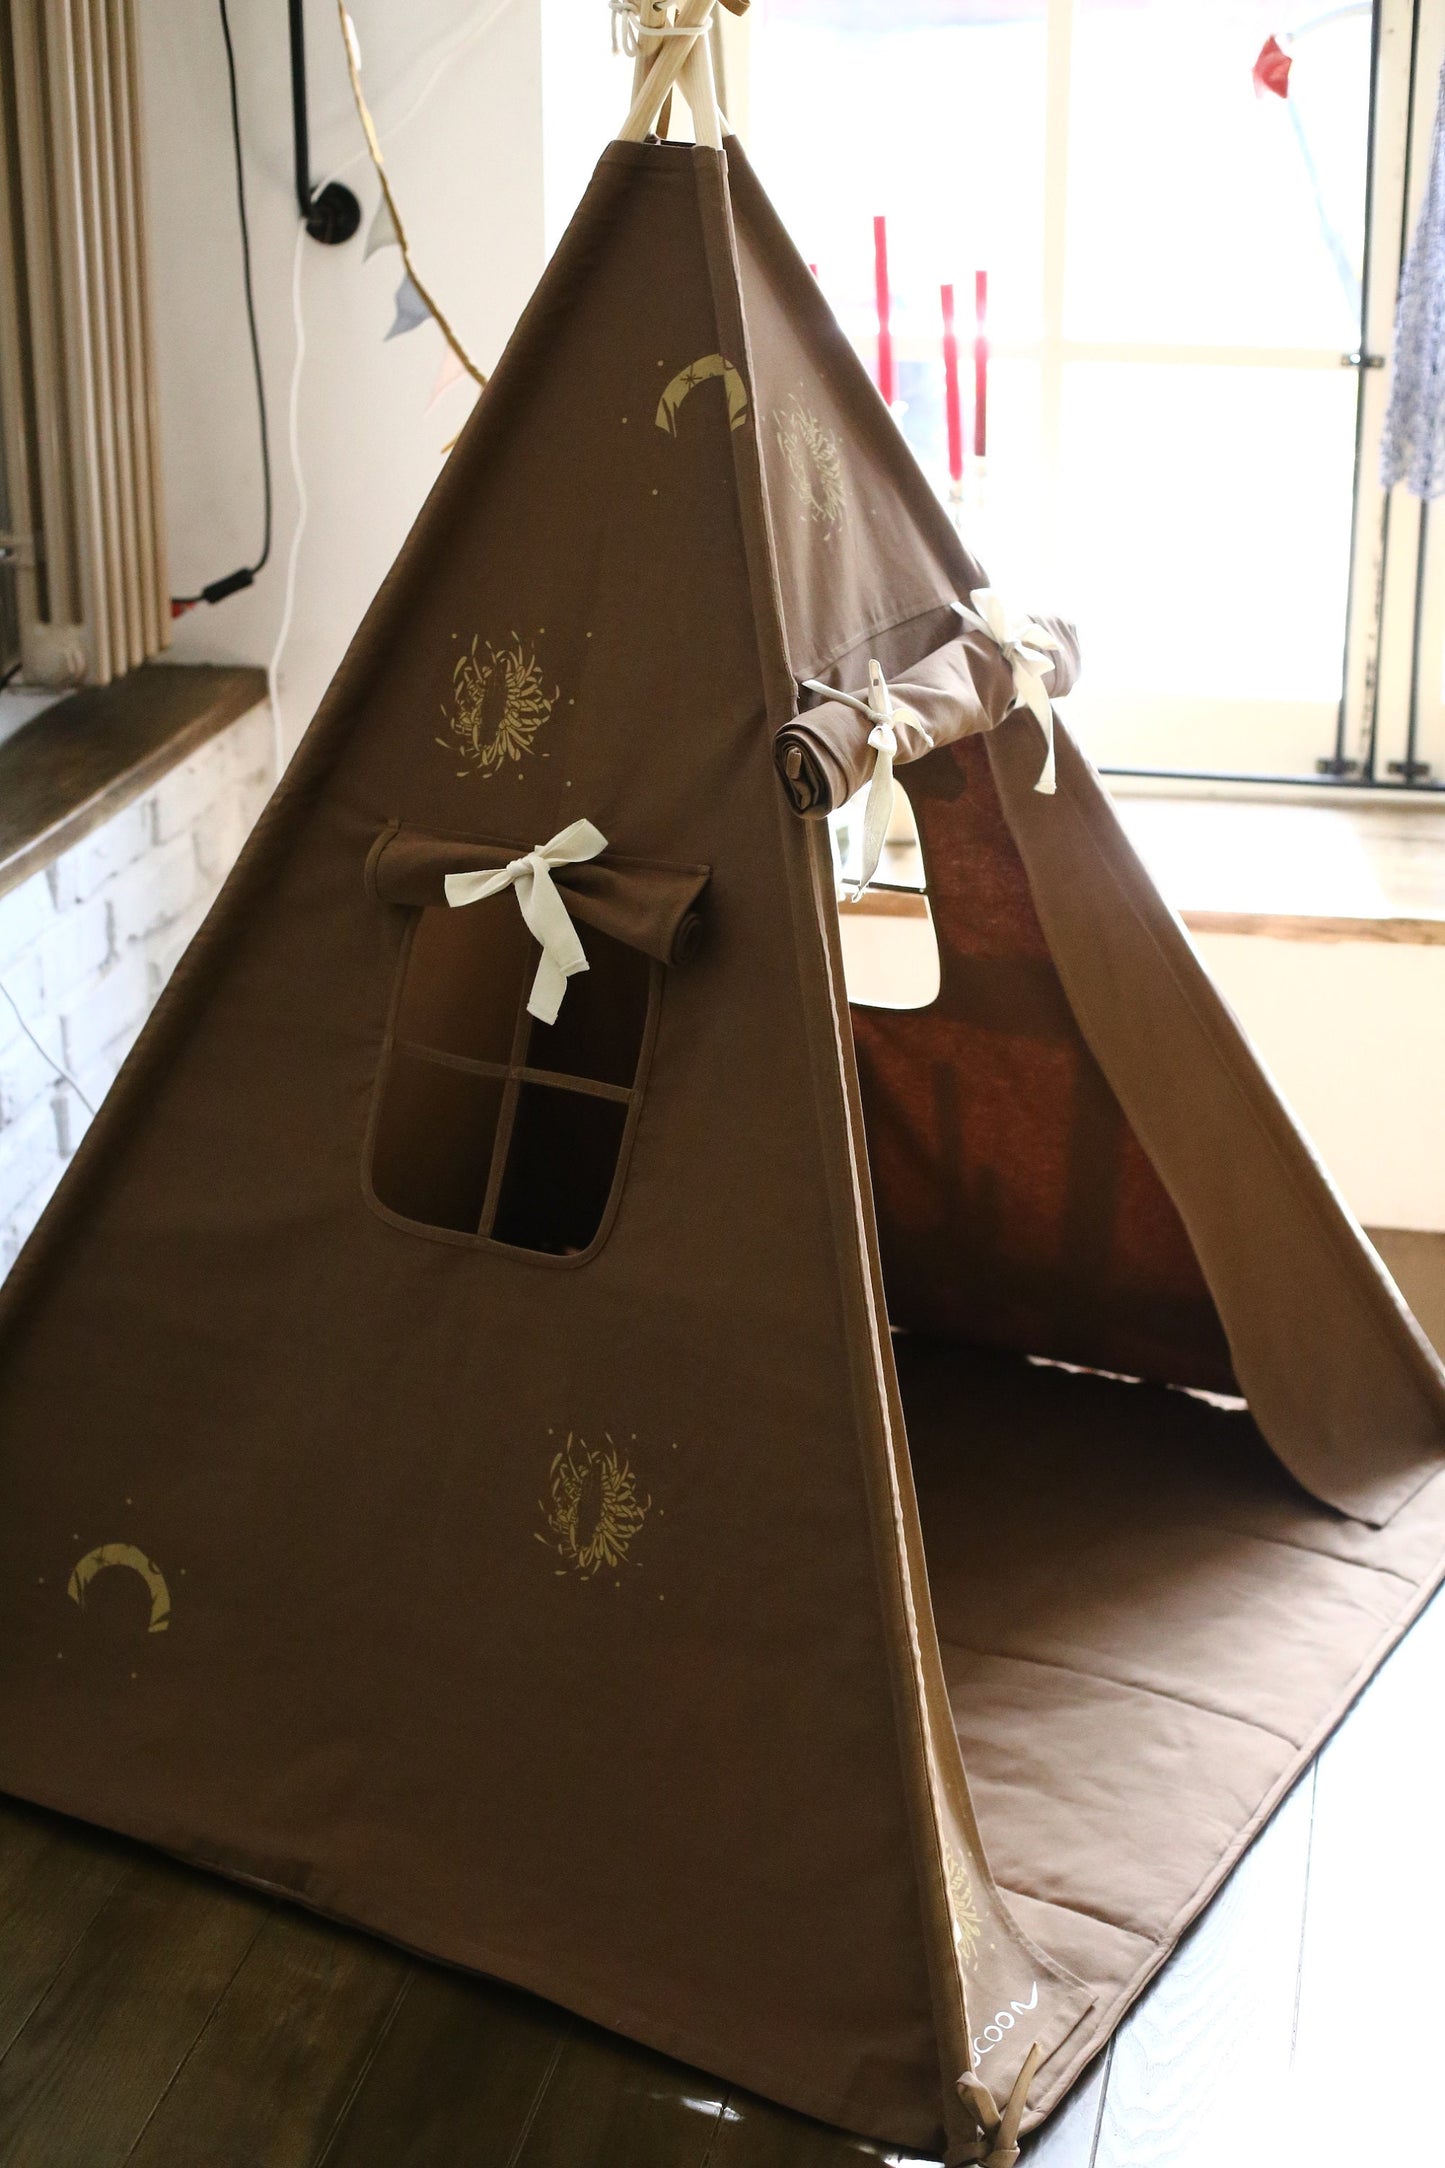 Play House Toys | Indoor Teepee Tent | Kids Room Teepee | Fancy Playhouse | Princess Castle Playhouse Tent - Christmas gift